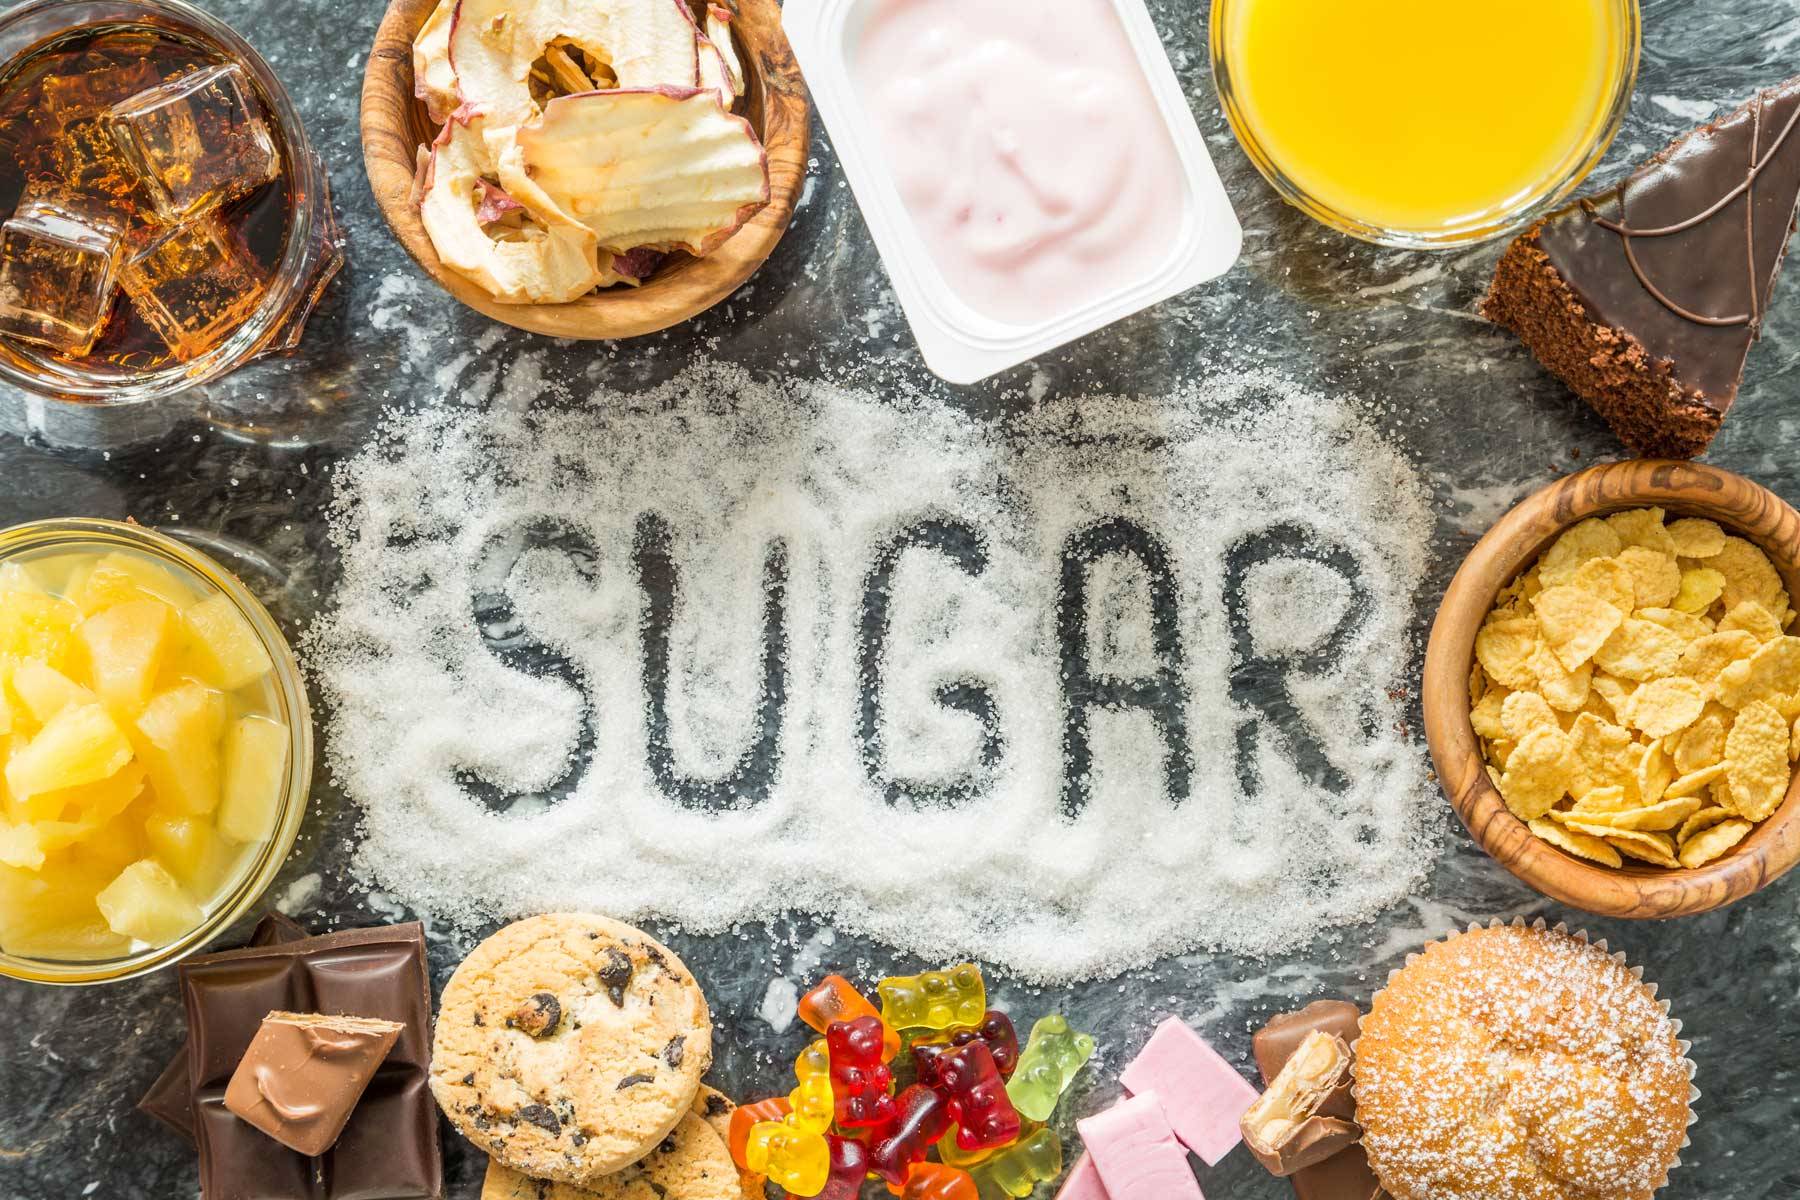 Sugar intake in daily basis should be controlled, its not good for health